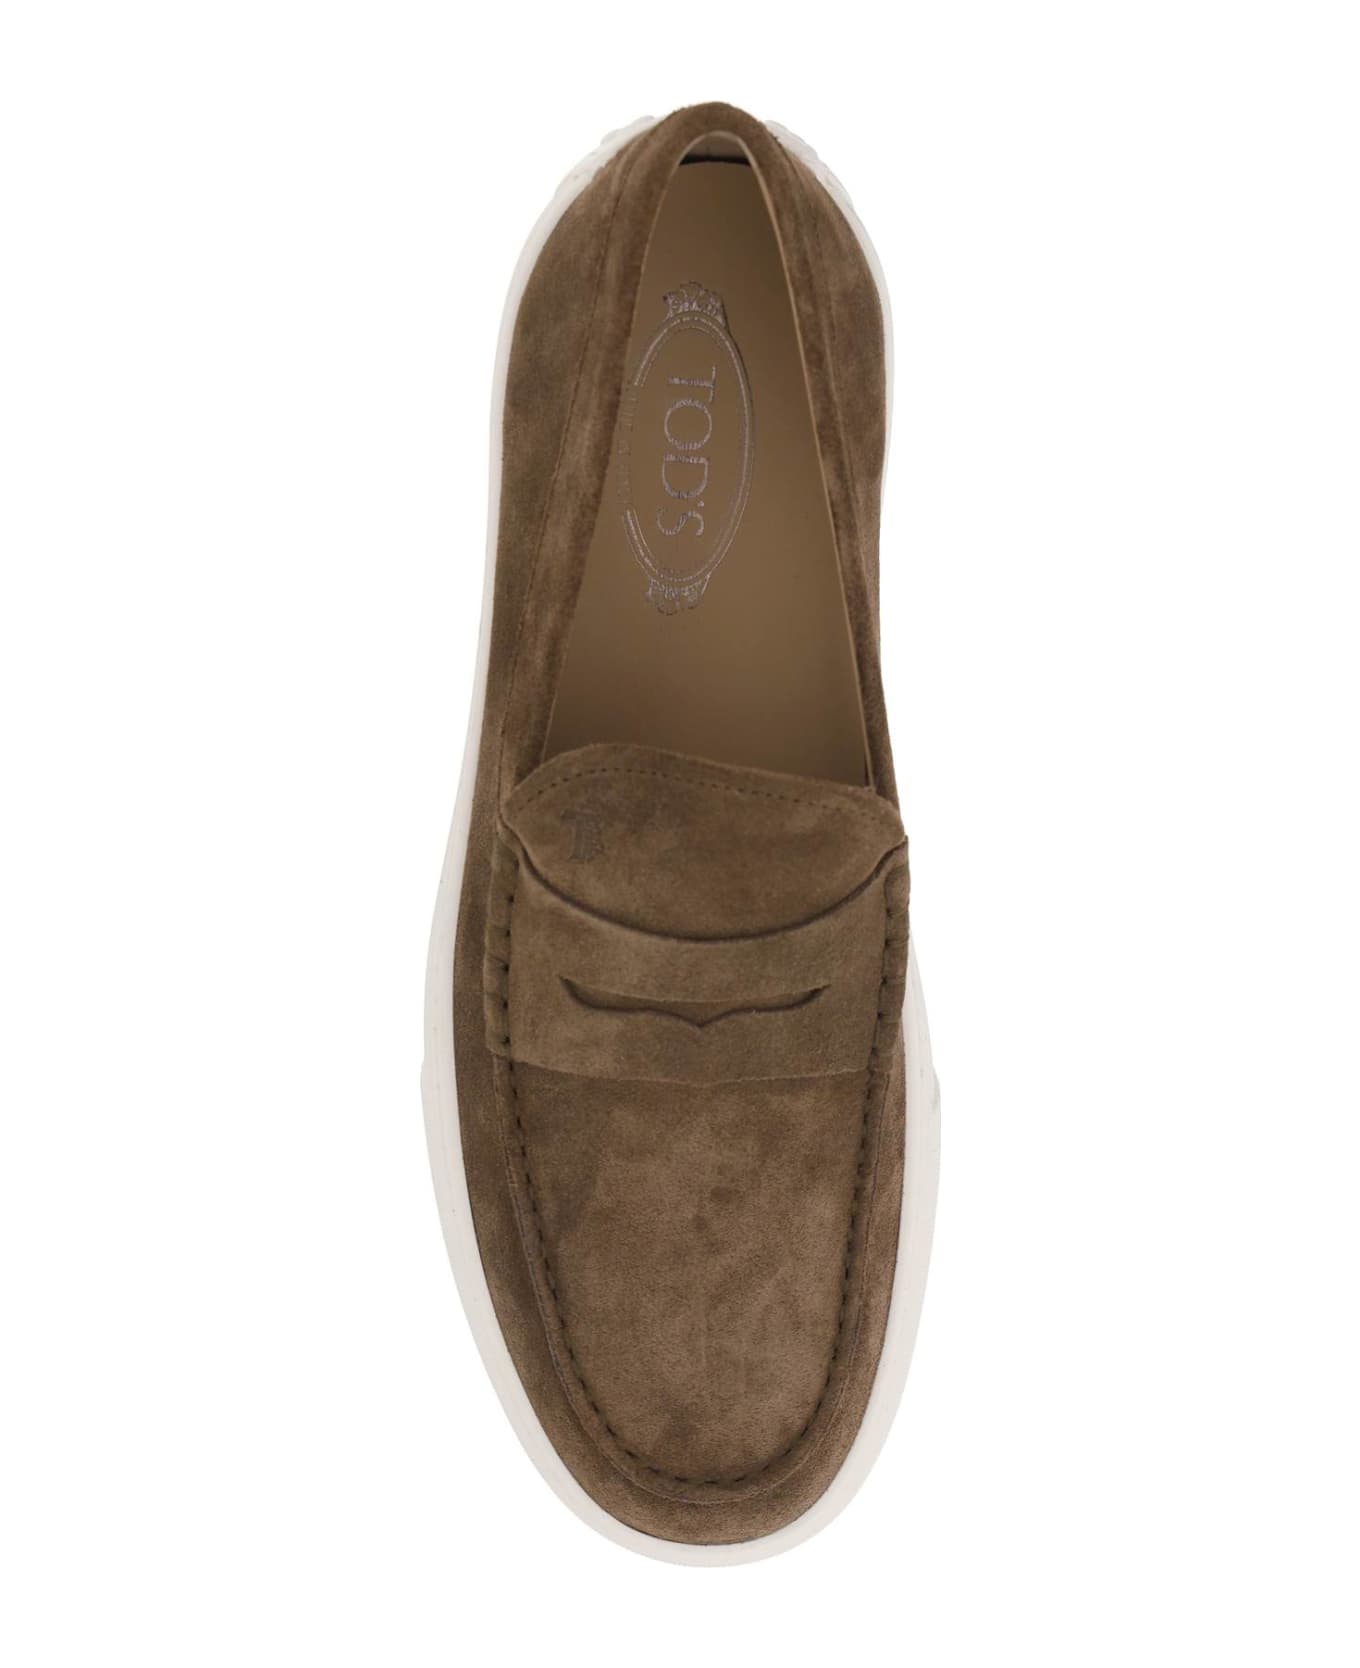 Tod's Loafers - NOCE CHIARO (Brown) スニーカー